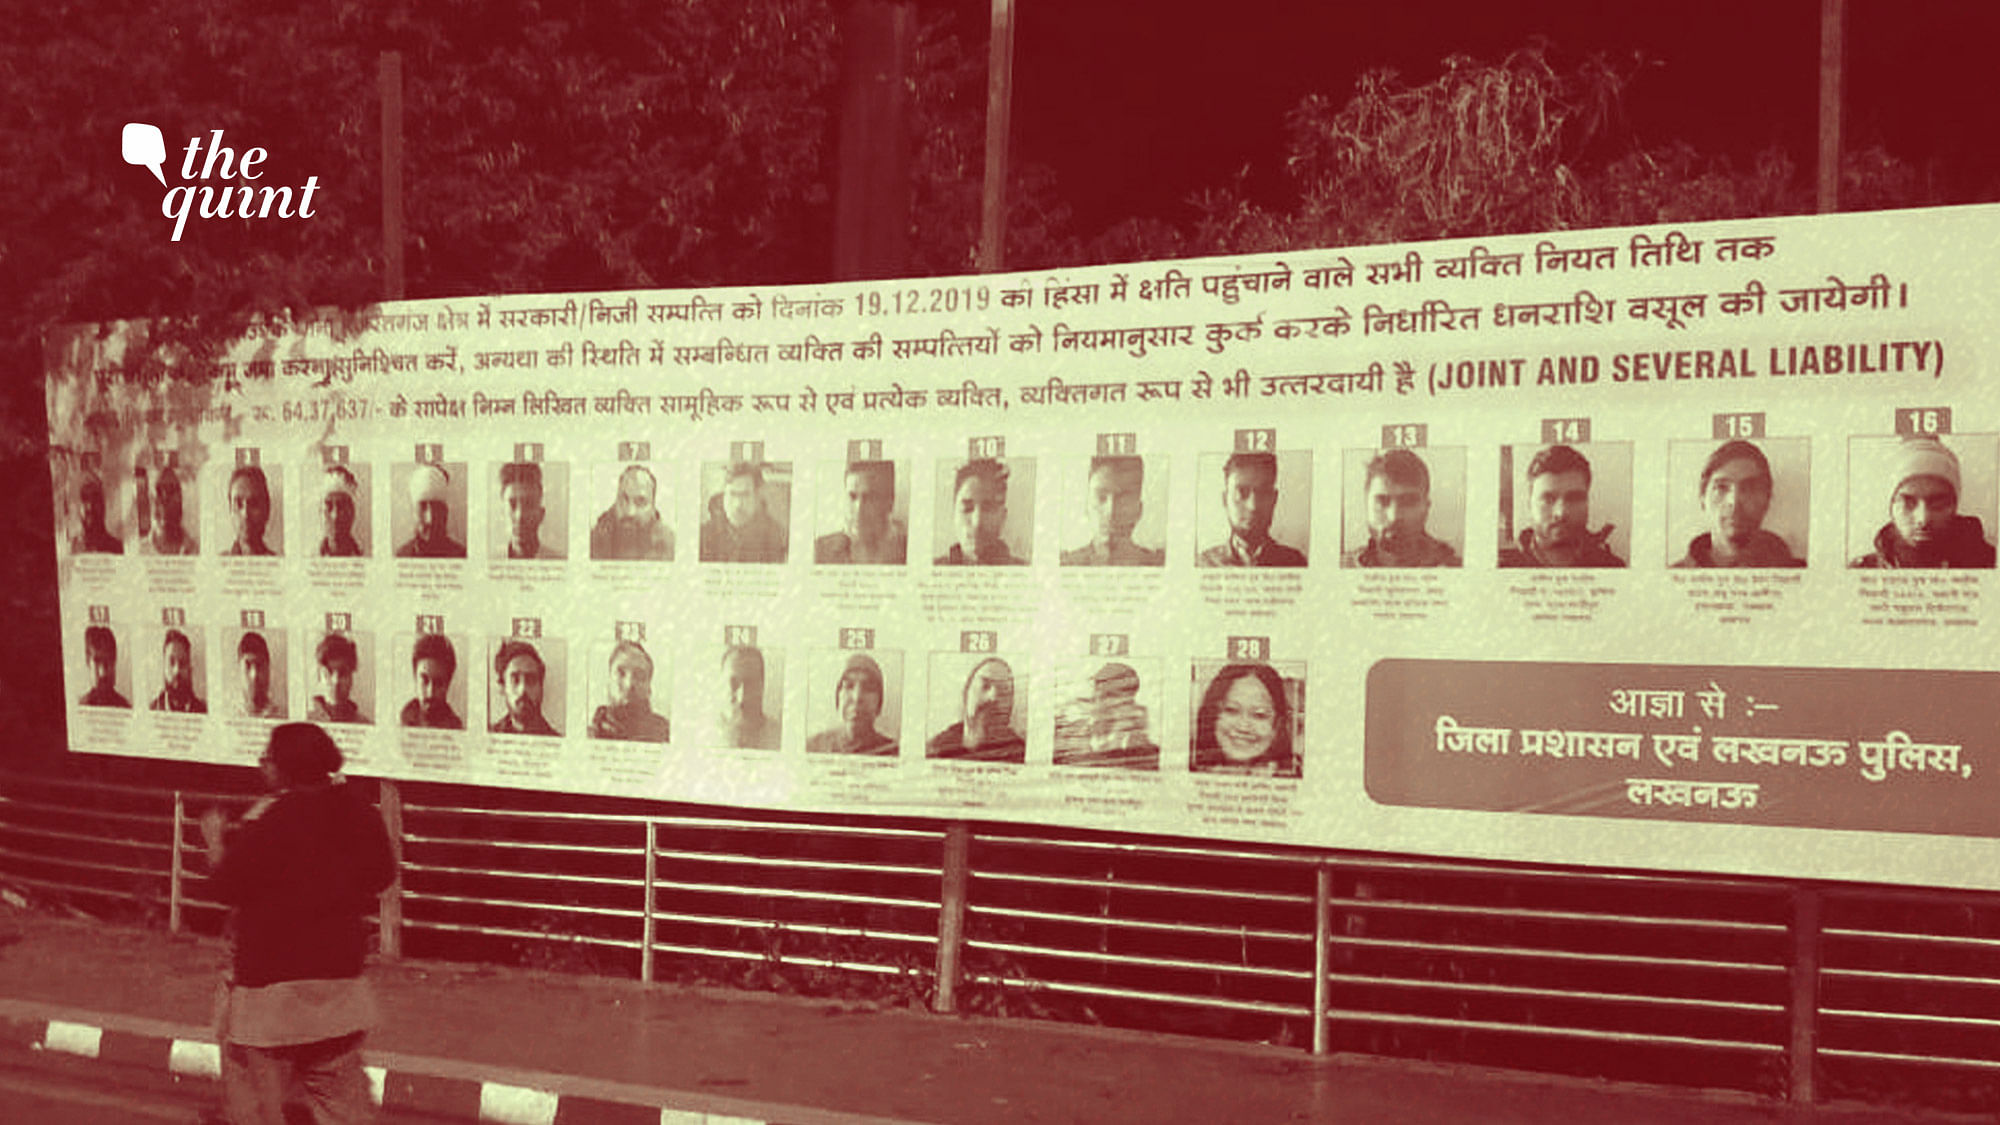 One of the banners in Lucknow